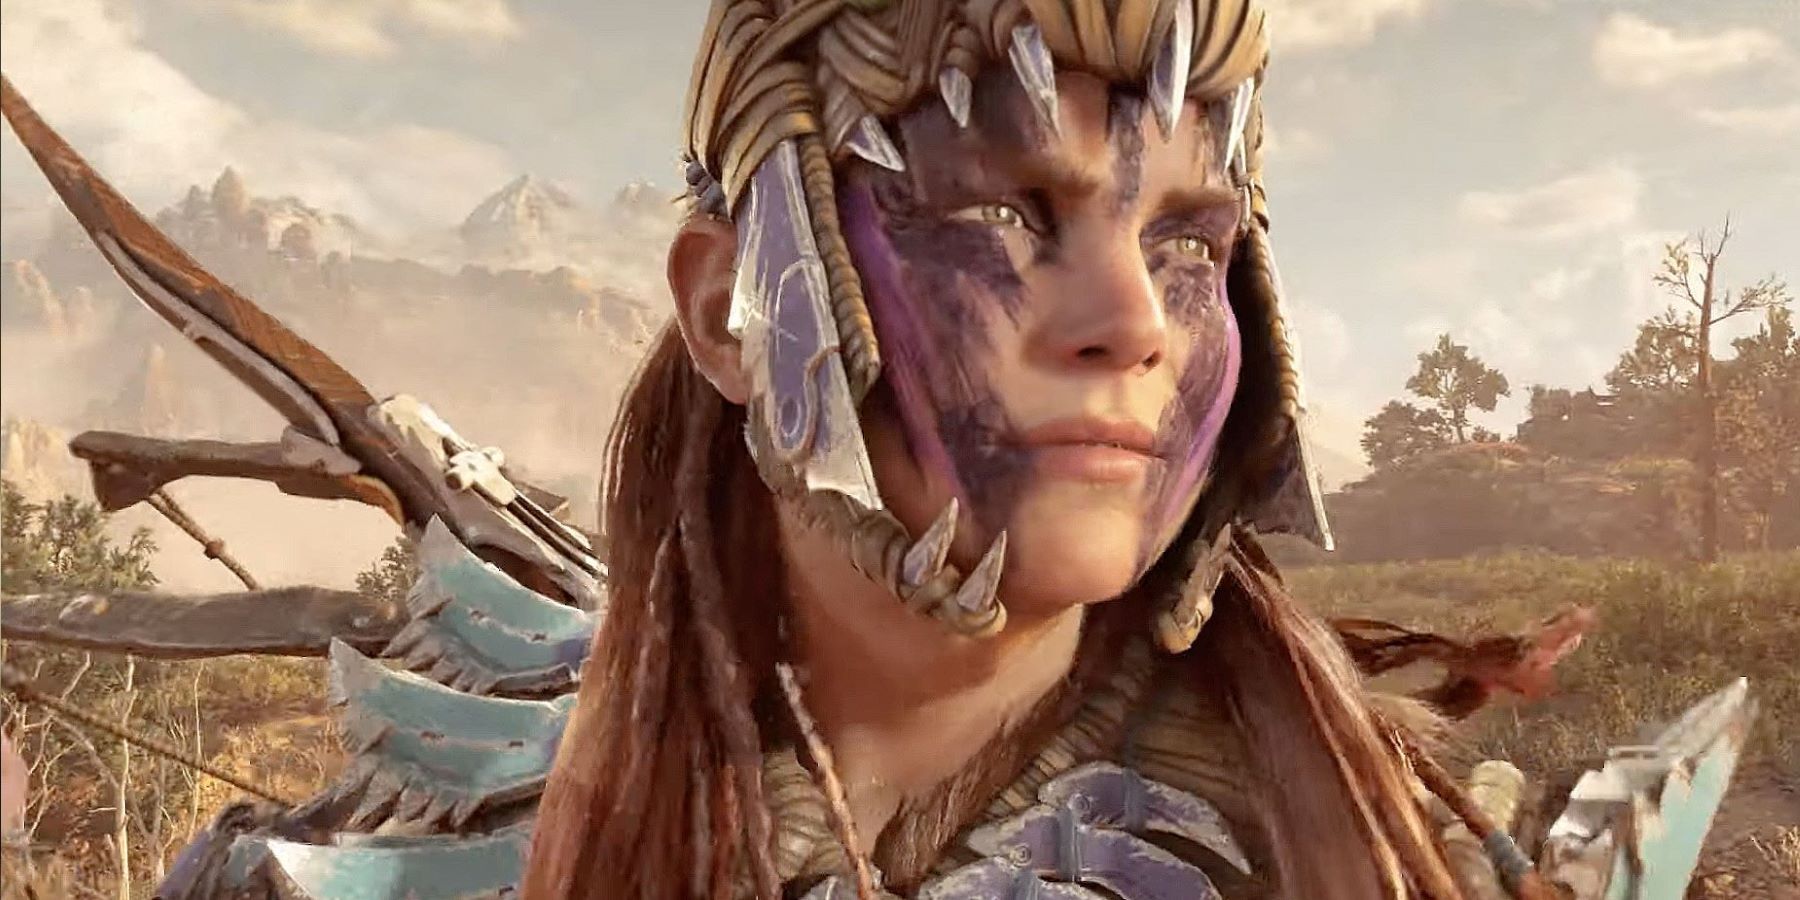 Aloy wearing a new set of armor and face paint in Horizon Forbidden West